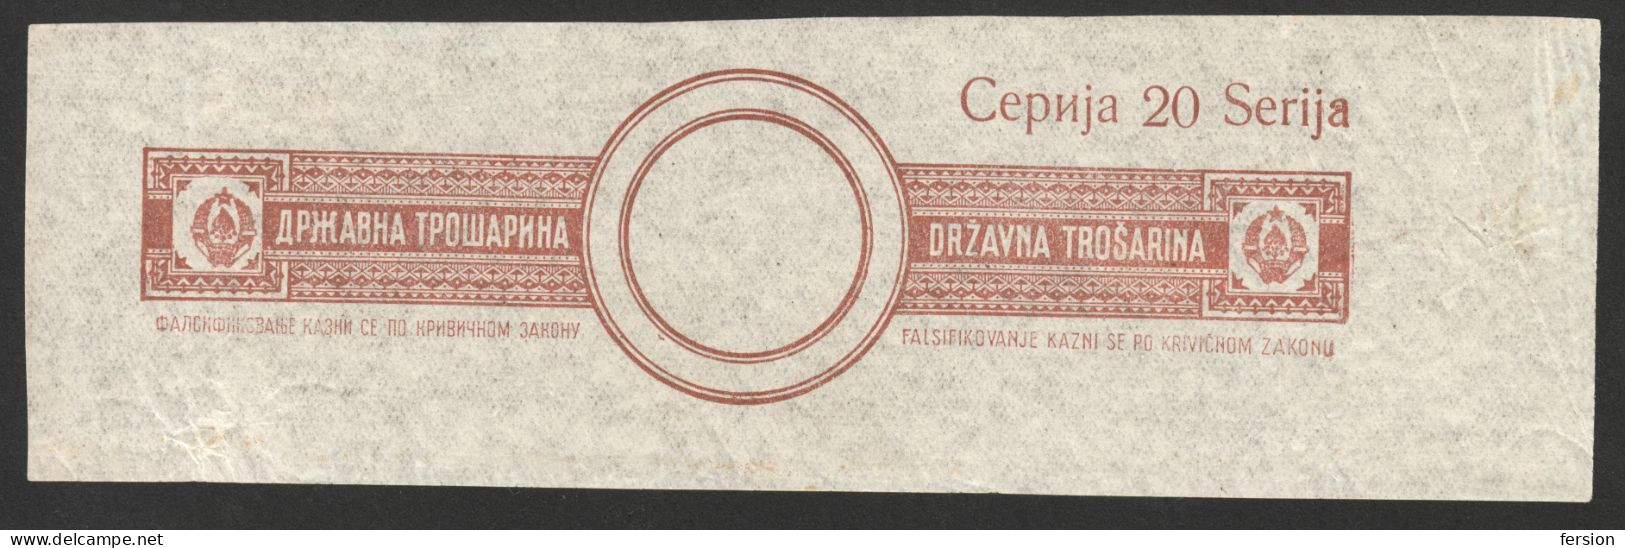 Yugoslavia 1945 EXCISE Revenue Fiscal Luxury Tax CONTROL BAND Stamp / Stripe Seal - Ser. No. 20 - Coat Of Arms - Dienstzegels